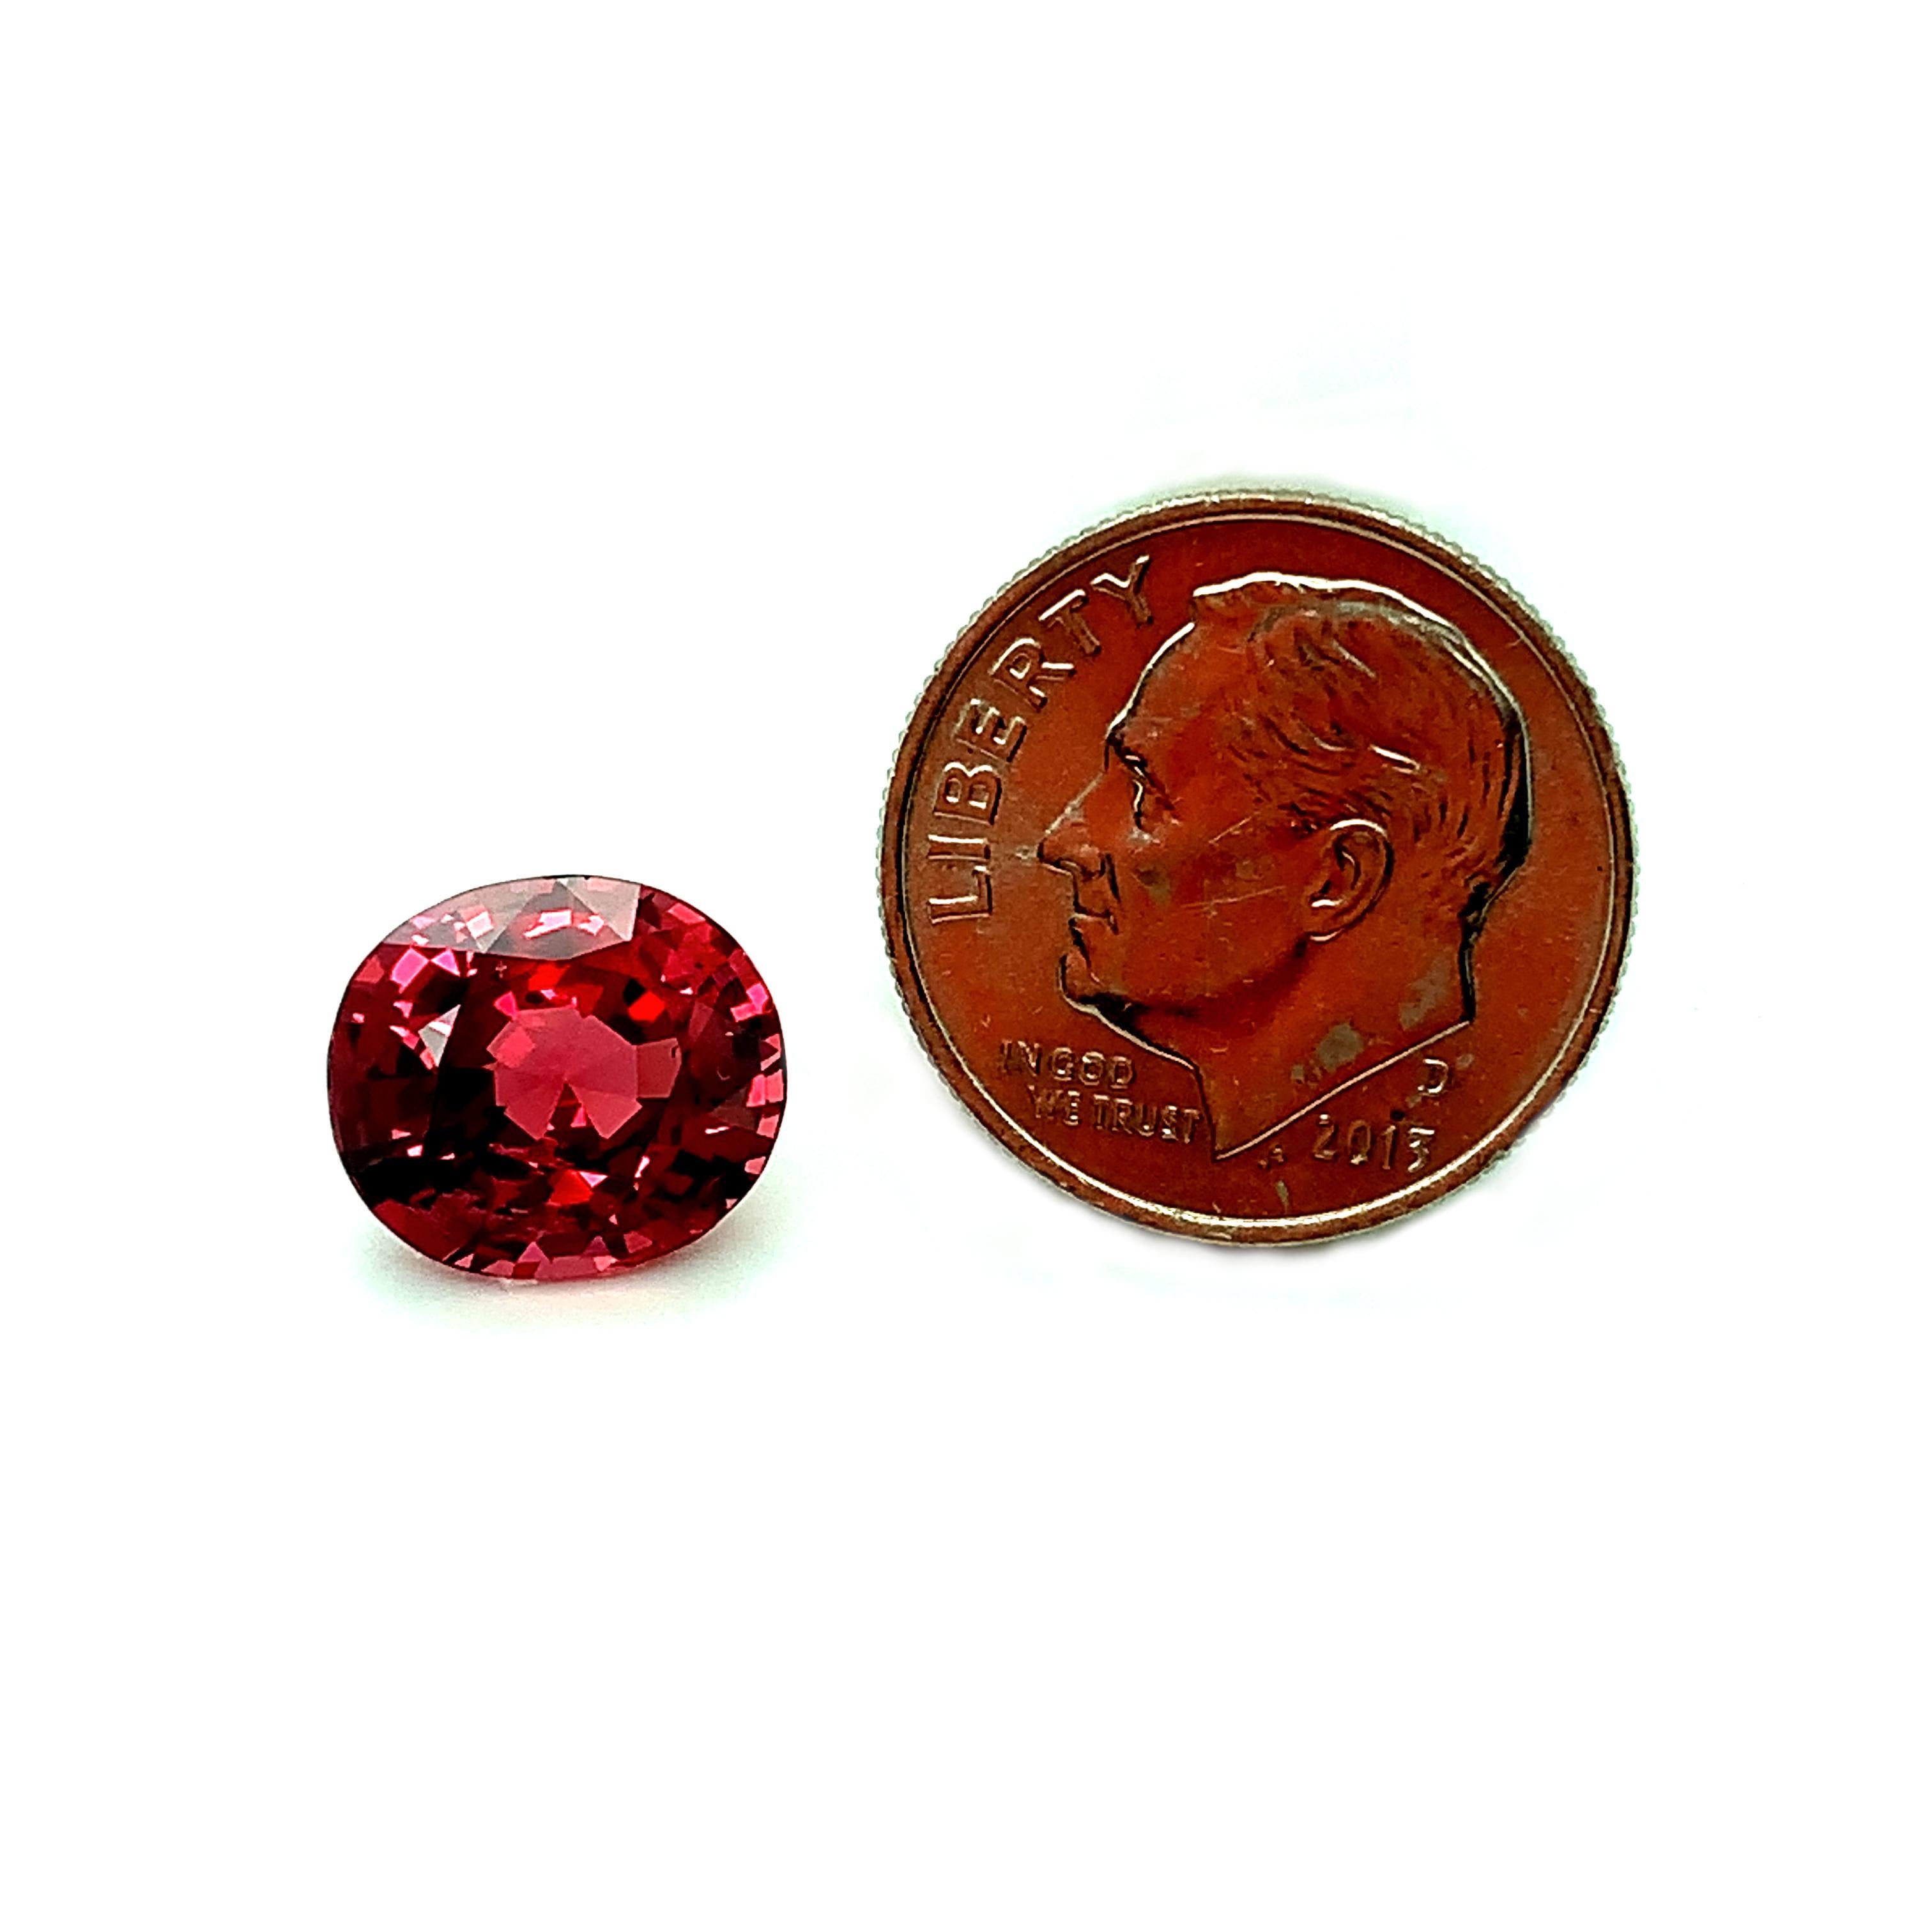 Unheated 5.14 Carat Red Spinel Oval, Unset Loose Gemstone, GIA Certified 3